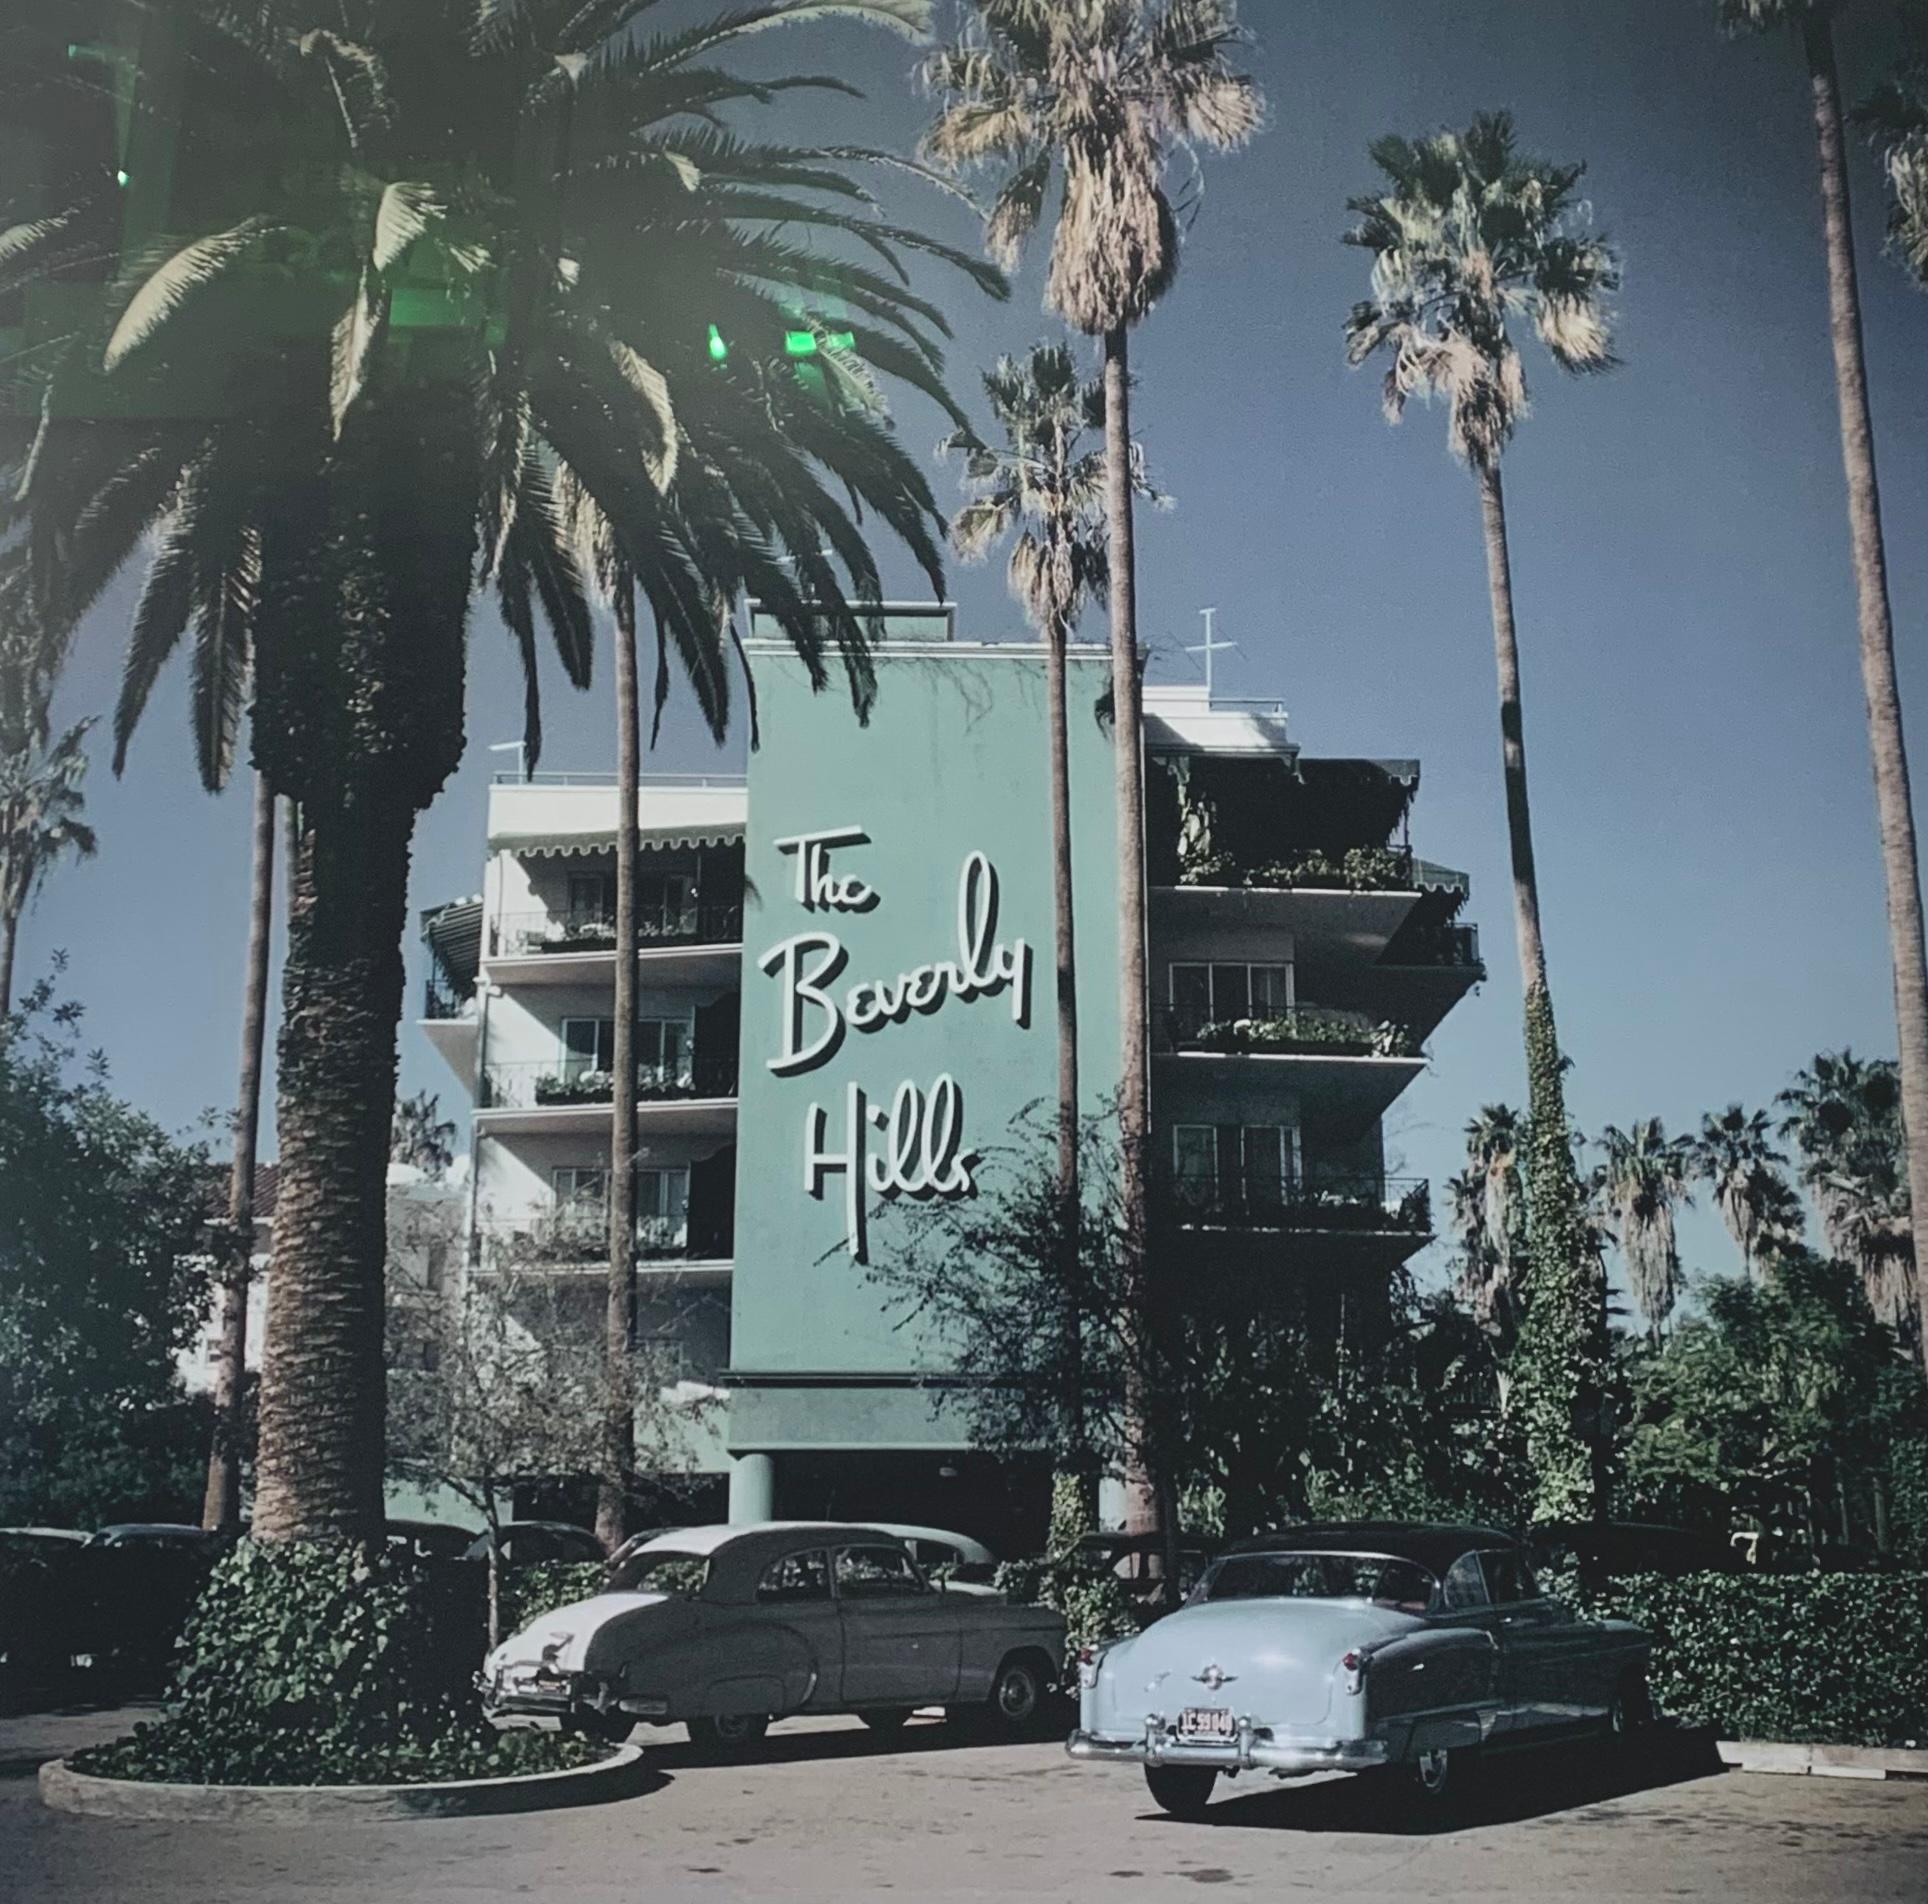 "Beverly Hills Hotel" by Slim Aarons 

Cars parked outside the Beverly Hills Hotel on Sunset Boulevard in California, 1957. (Photo by Slim Aarons)

Slim Aarons (born George Allen Aarons; October 29, 1916 – May 30, 2006) was an American photographer